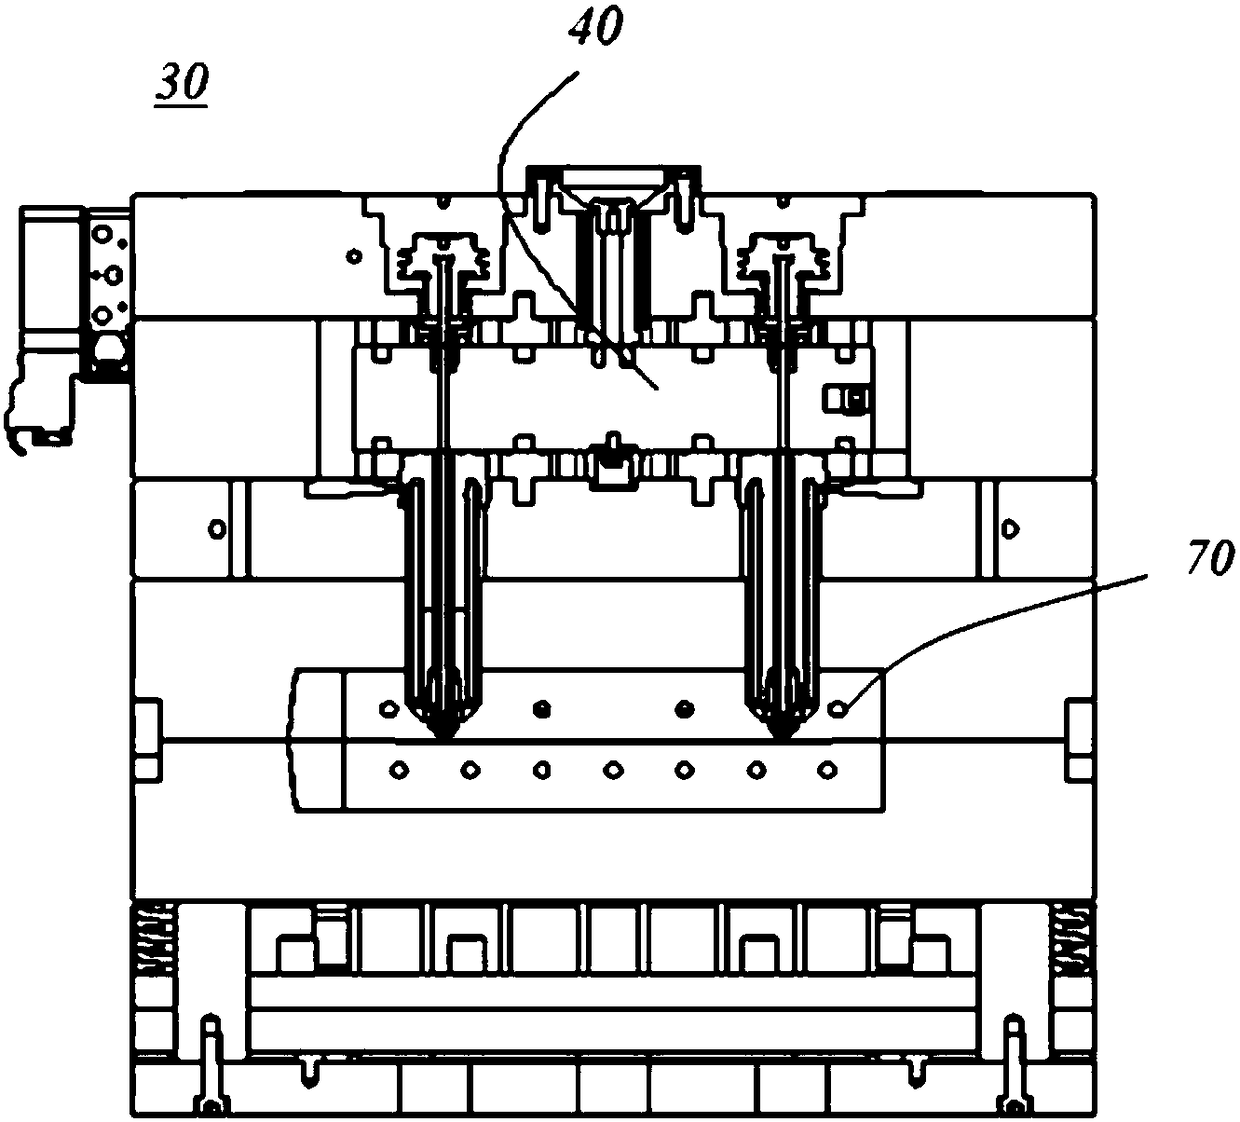 Cylinder block assembly and hot runner system provided with same